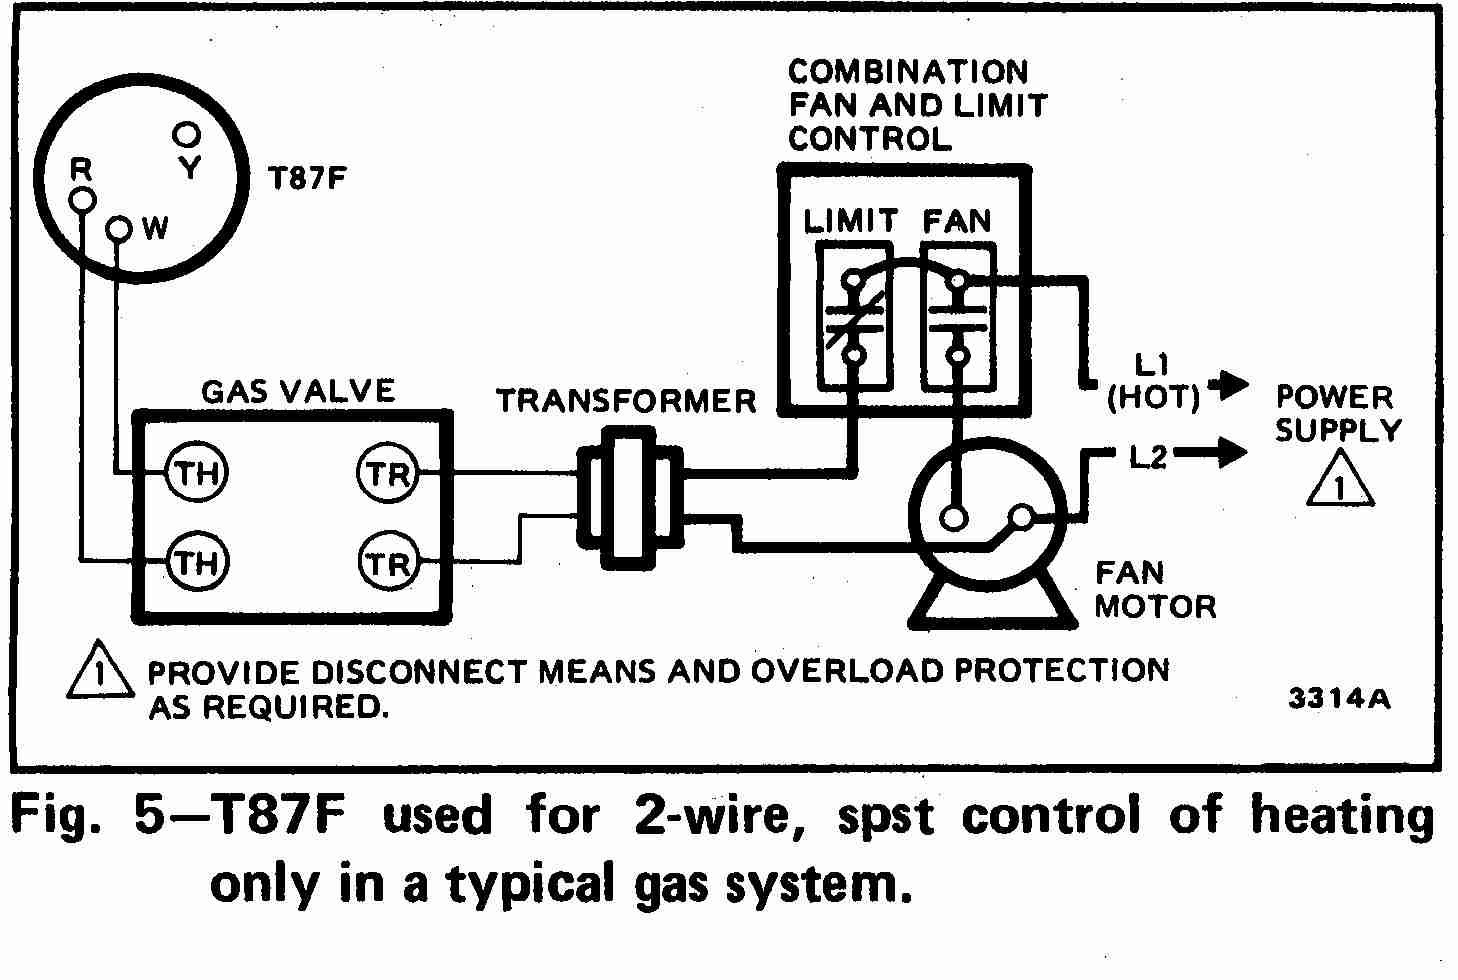 Room thermostat Wiring Diagrams for Hvac Systems within Chromalox Space Heater Wiring Diagram Sample · Modine Gas